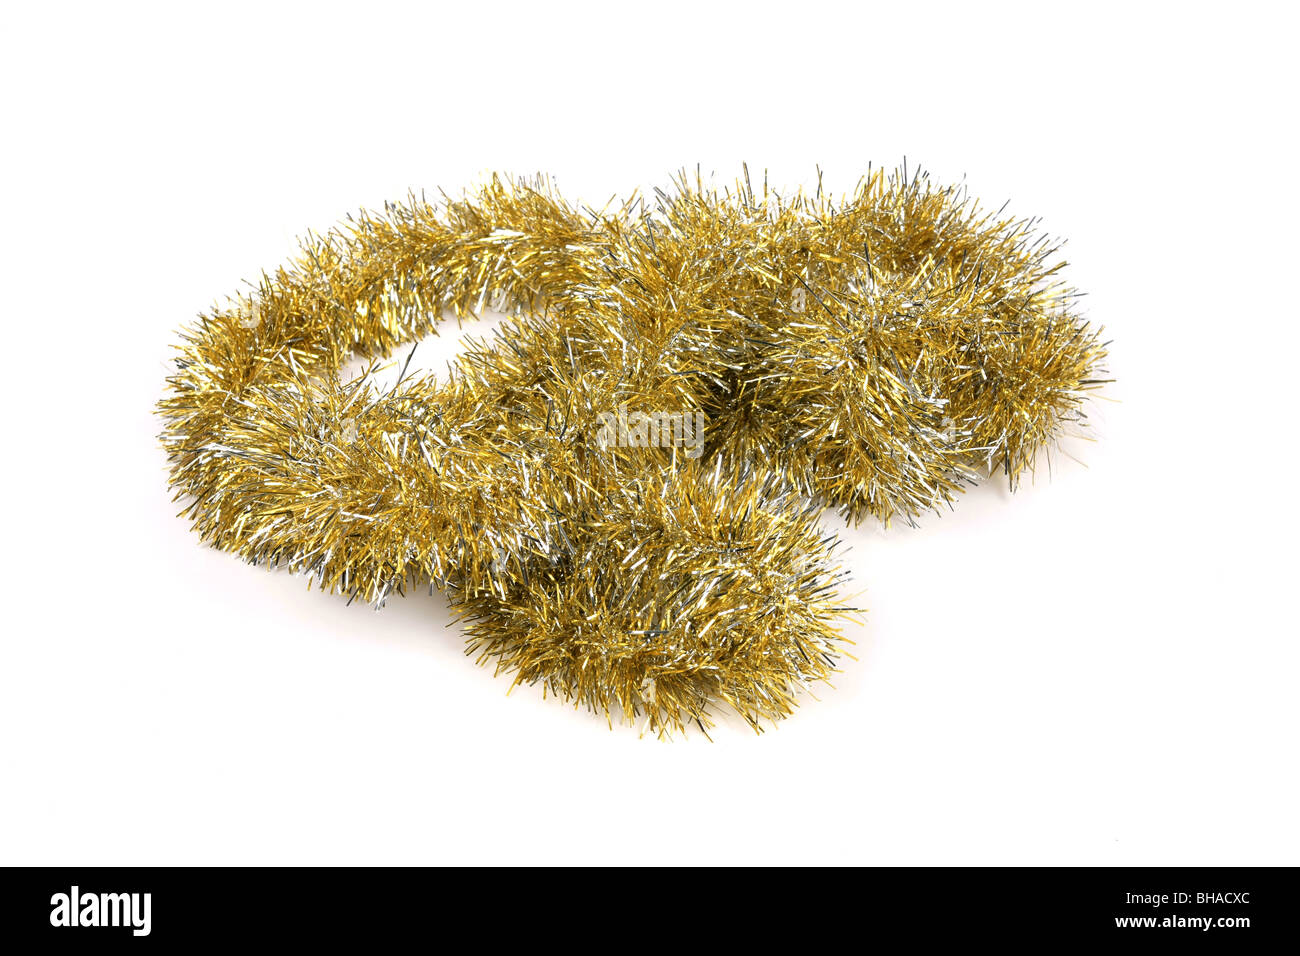 Gold Tinsel against a white background Stock Photo